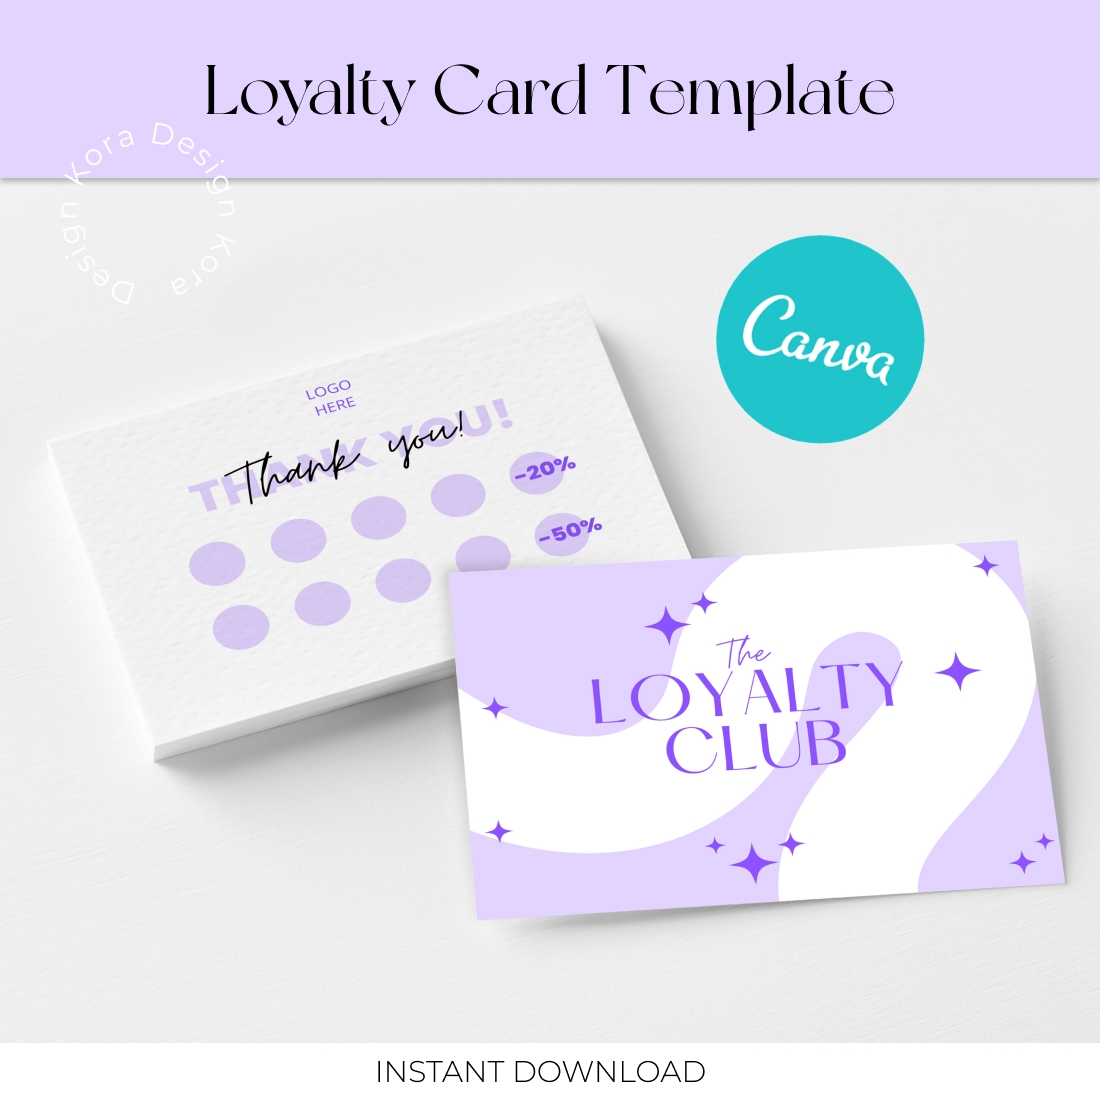 Printable Loyalty Card Template cover image.